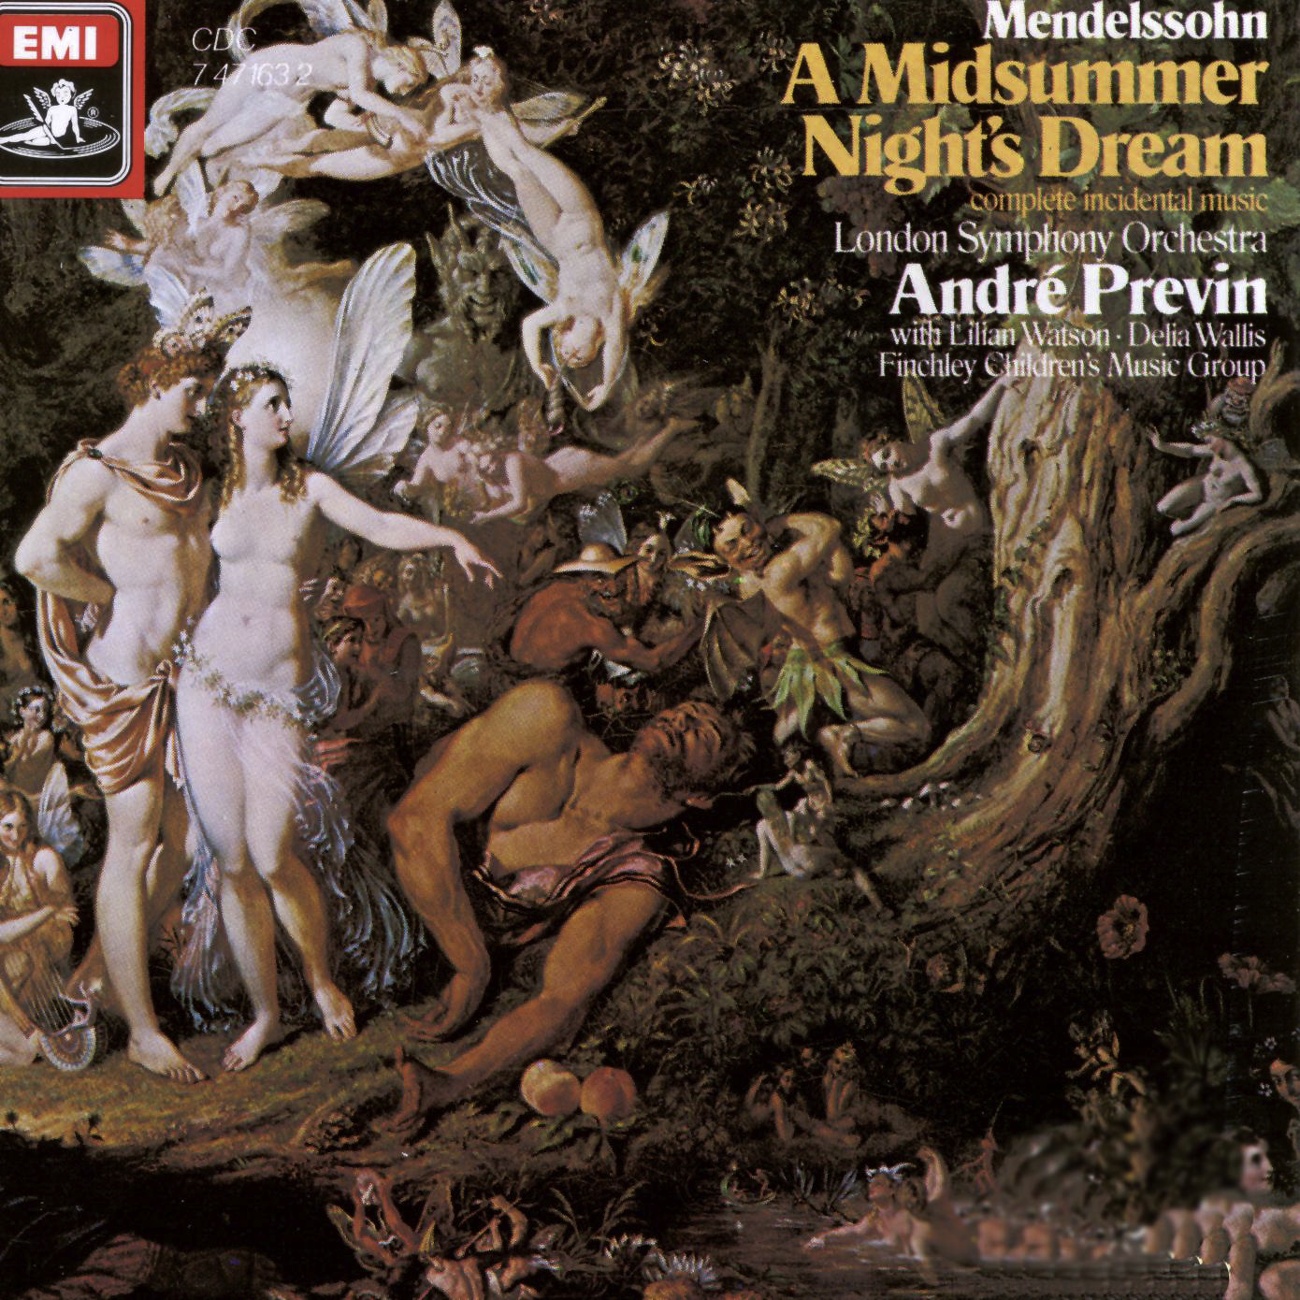 A Midsummer Night's Dream - incidental music Opp. 21 and 61 (1985 Digital Remaster): Song with chorus: 'You spotted snakes' (Act